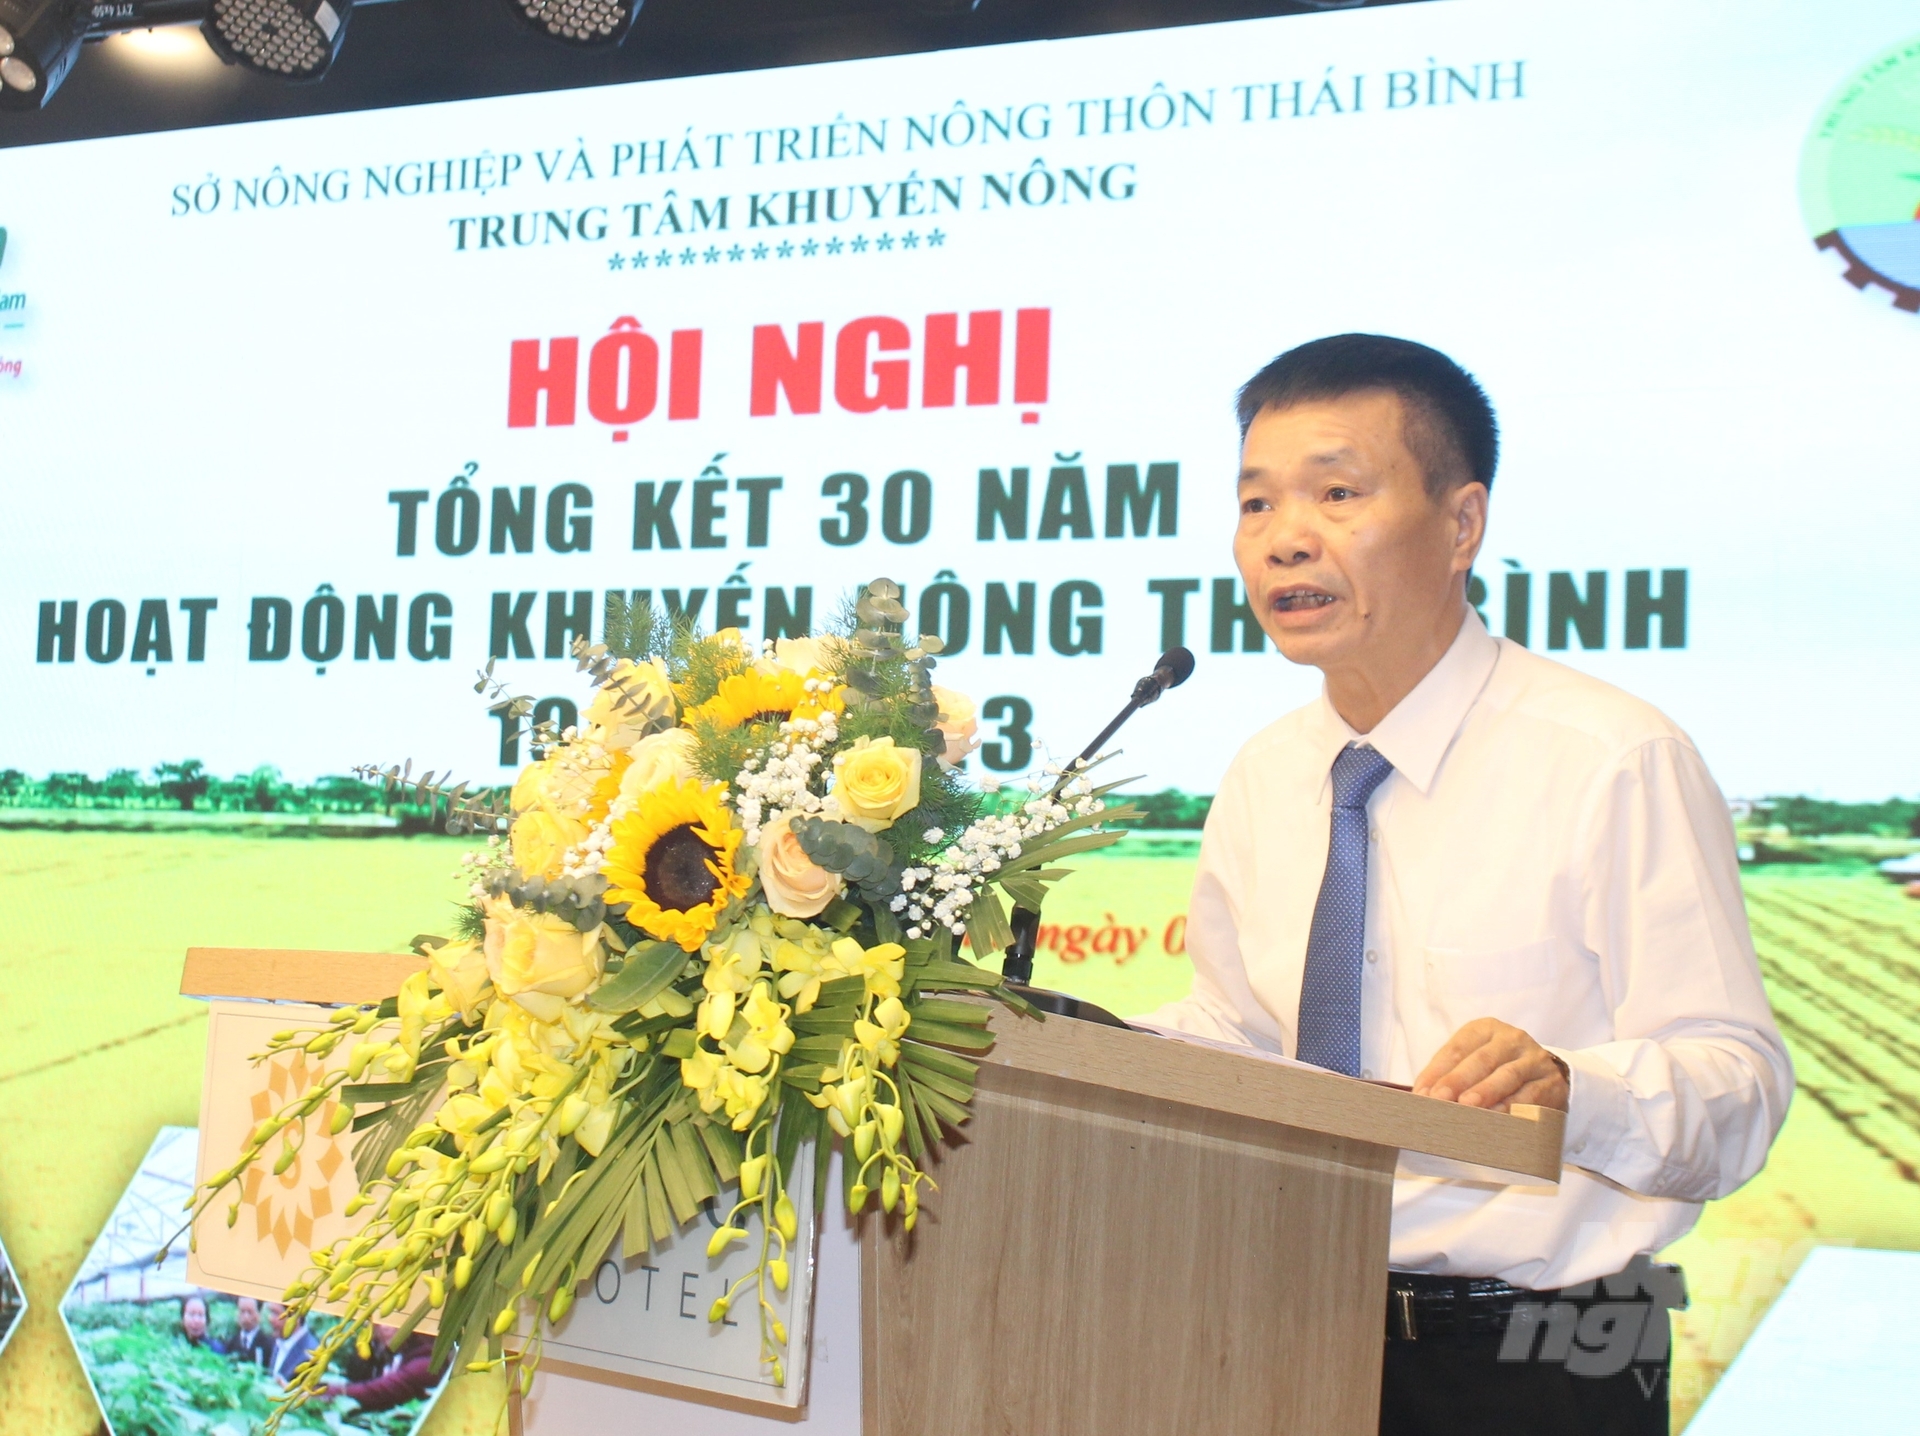 Mr. Tran Minh Hung, Director of the Thai Binh Agricultural Extension Center, shared about the Center's formation and development journey over the past 30 years. Photo: Trung Quan.